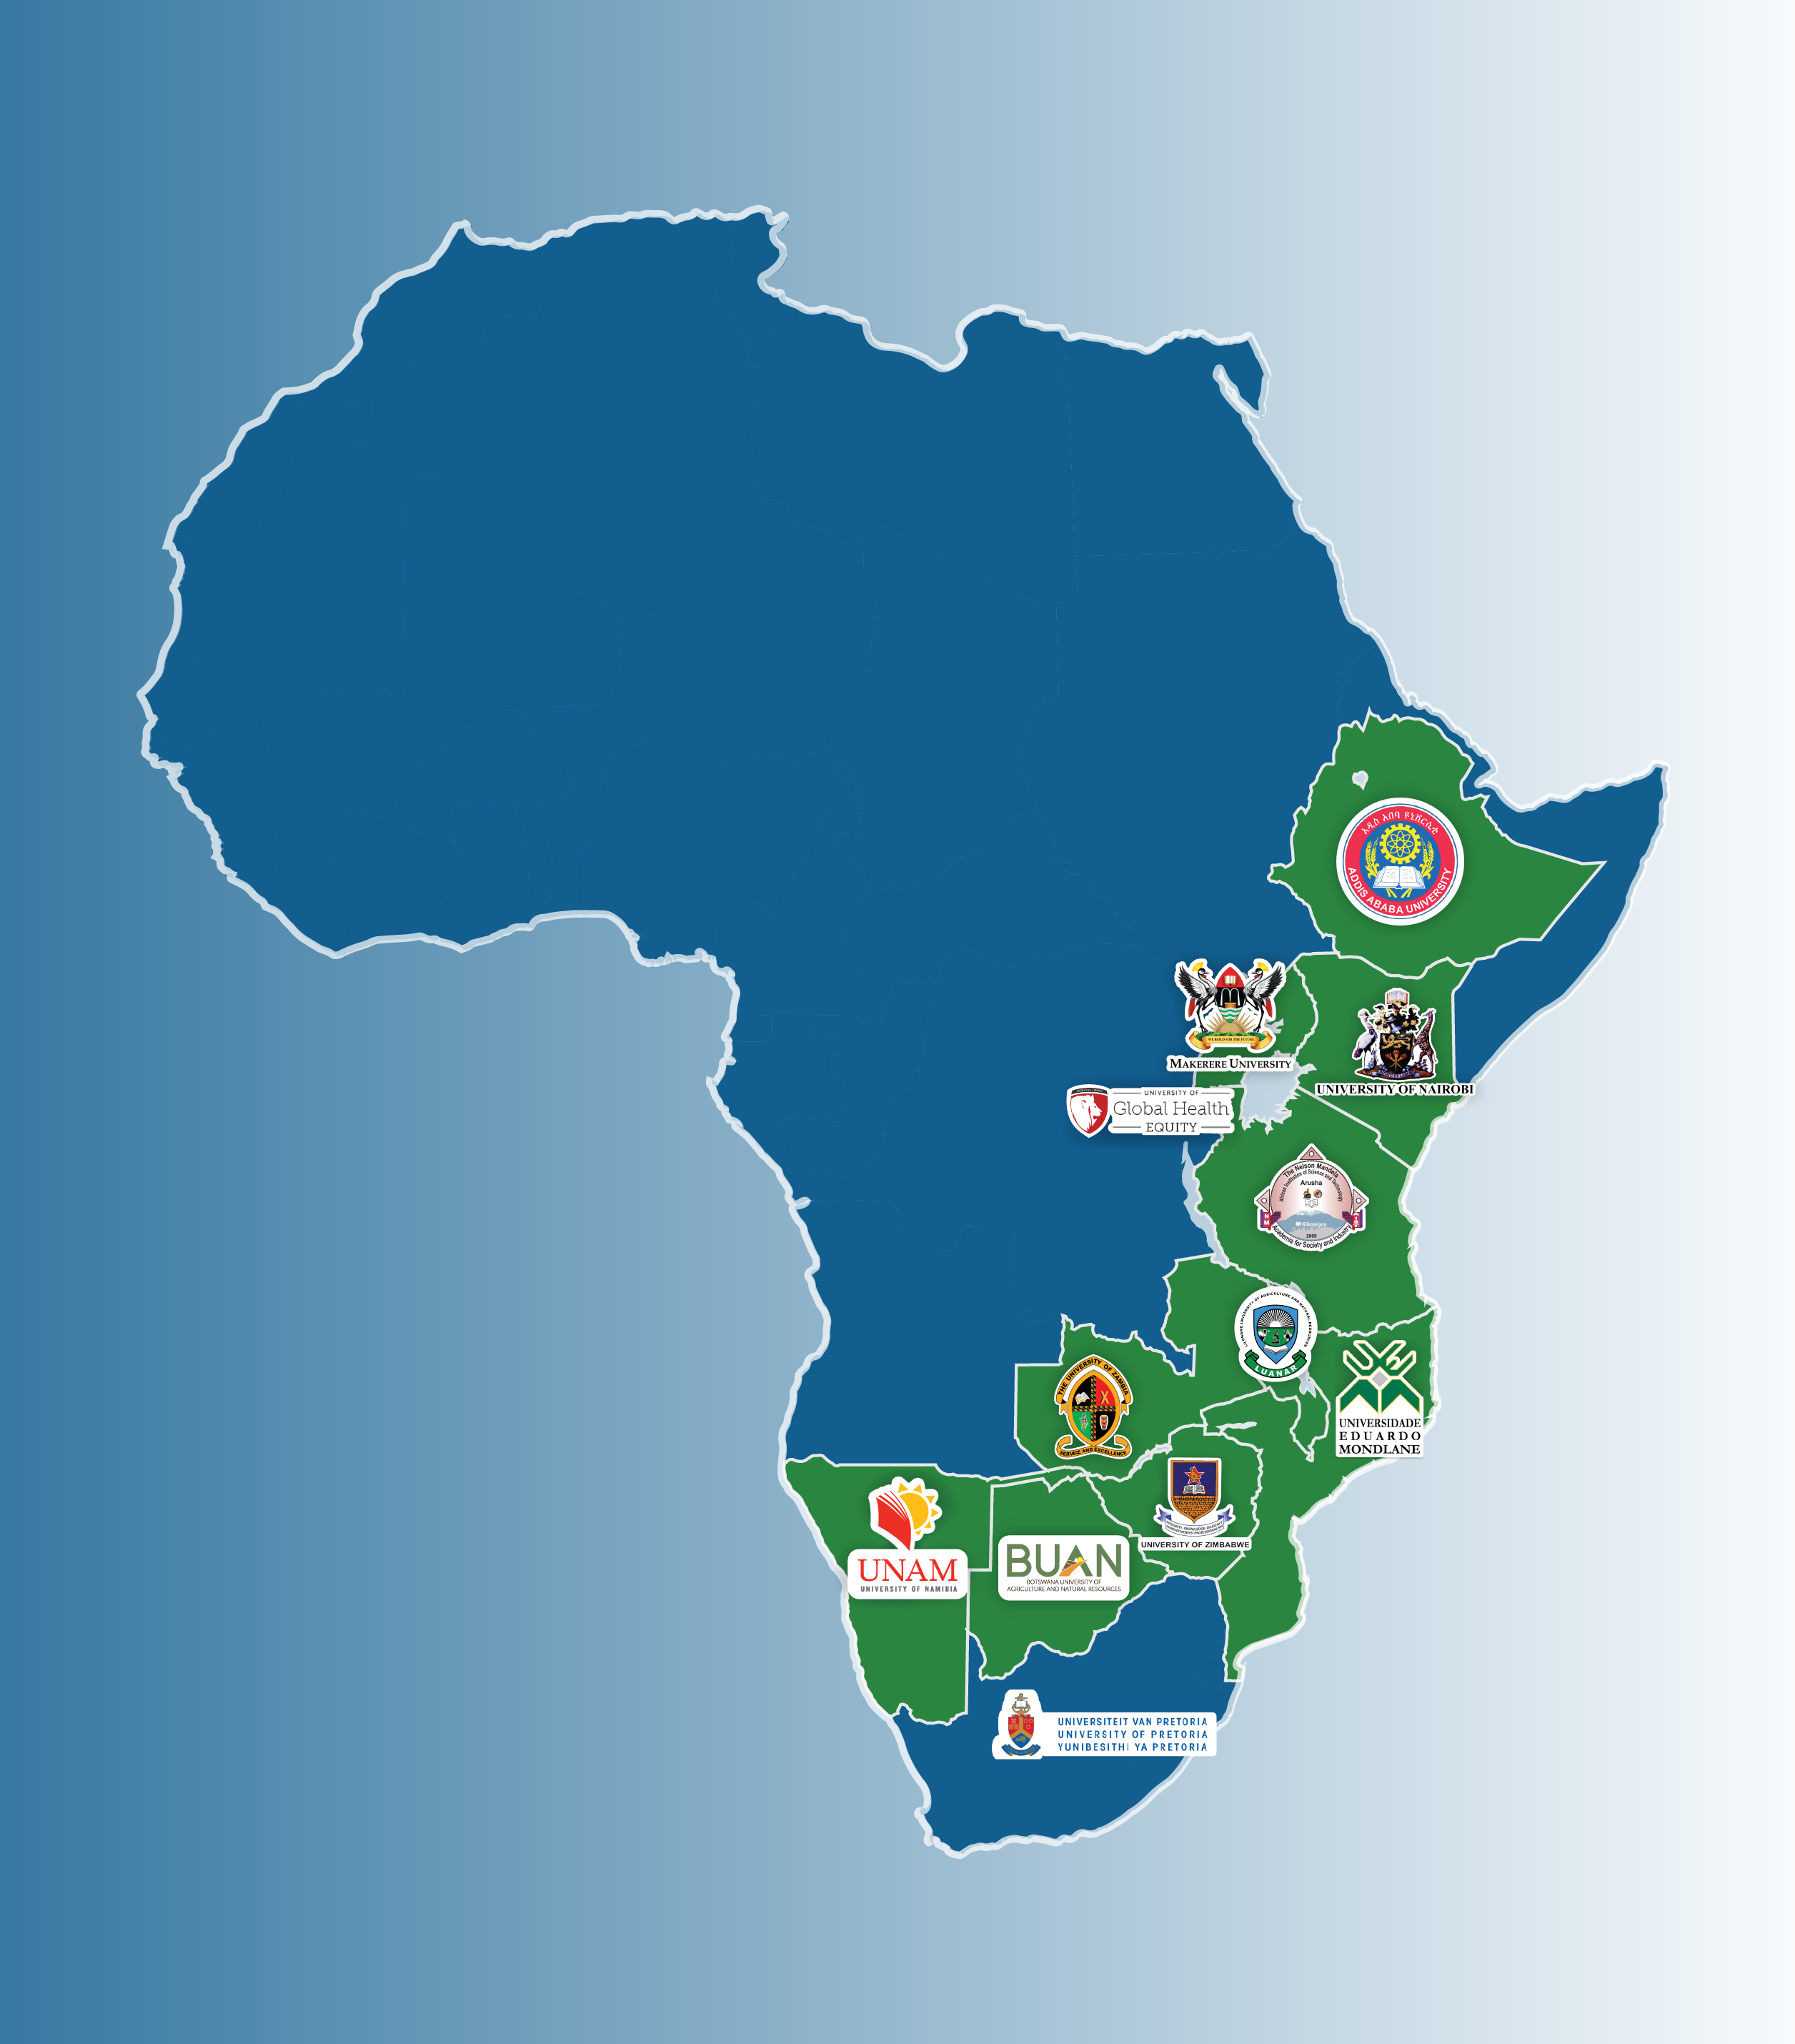 COHESA’s One Health Observatory: A one stop shop on One Health activities in 12 countries in Africa